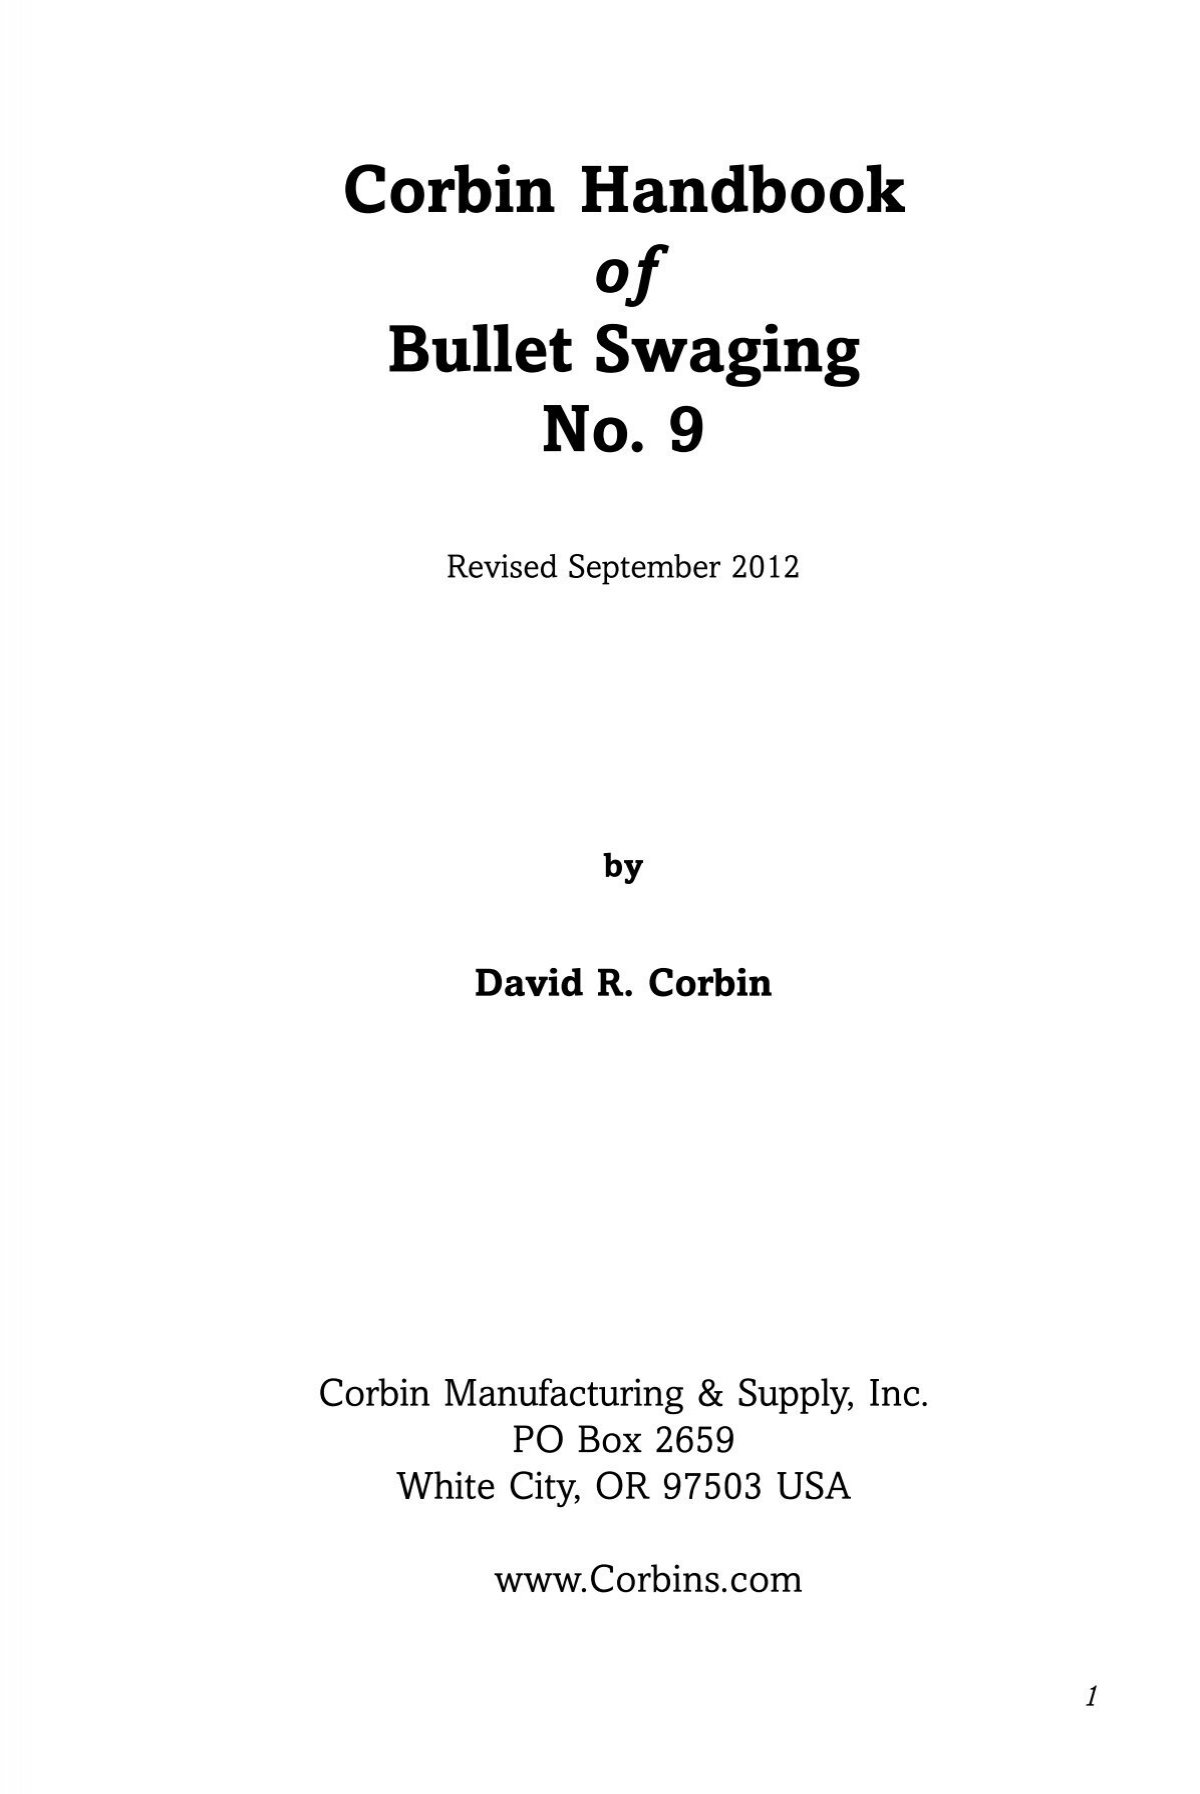 HB-9 updated text (PDF) - Corbin Bullet Swaging